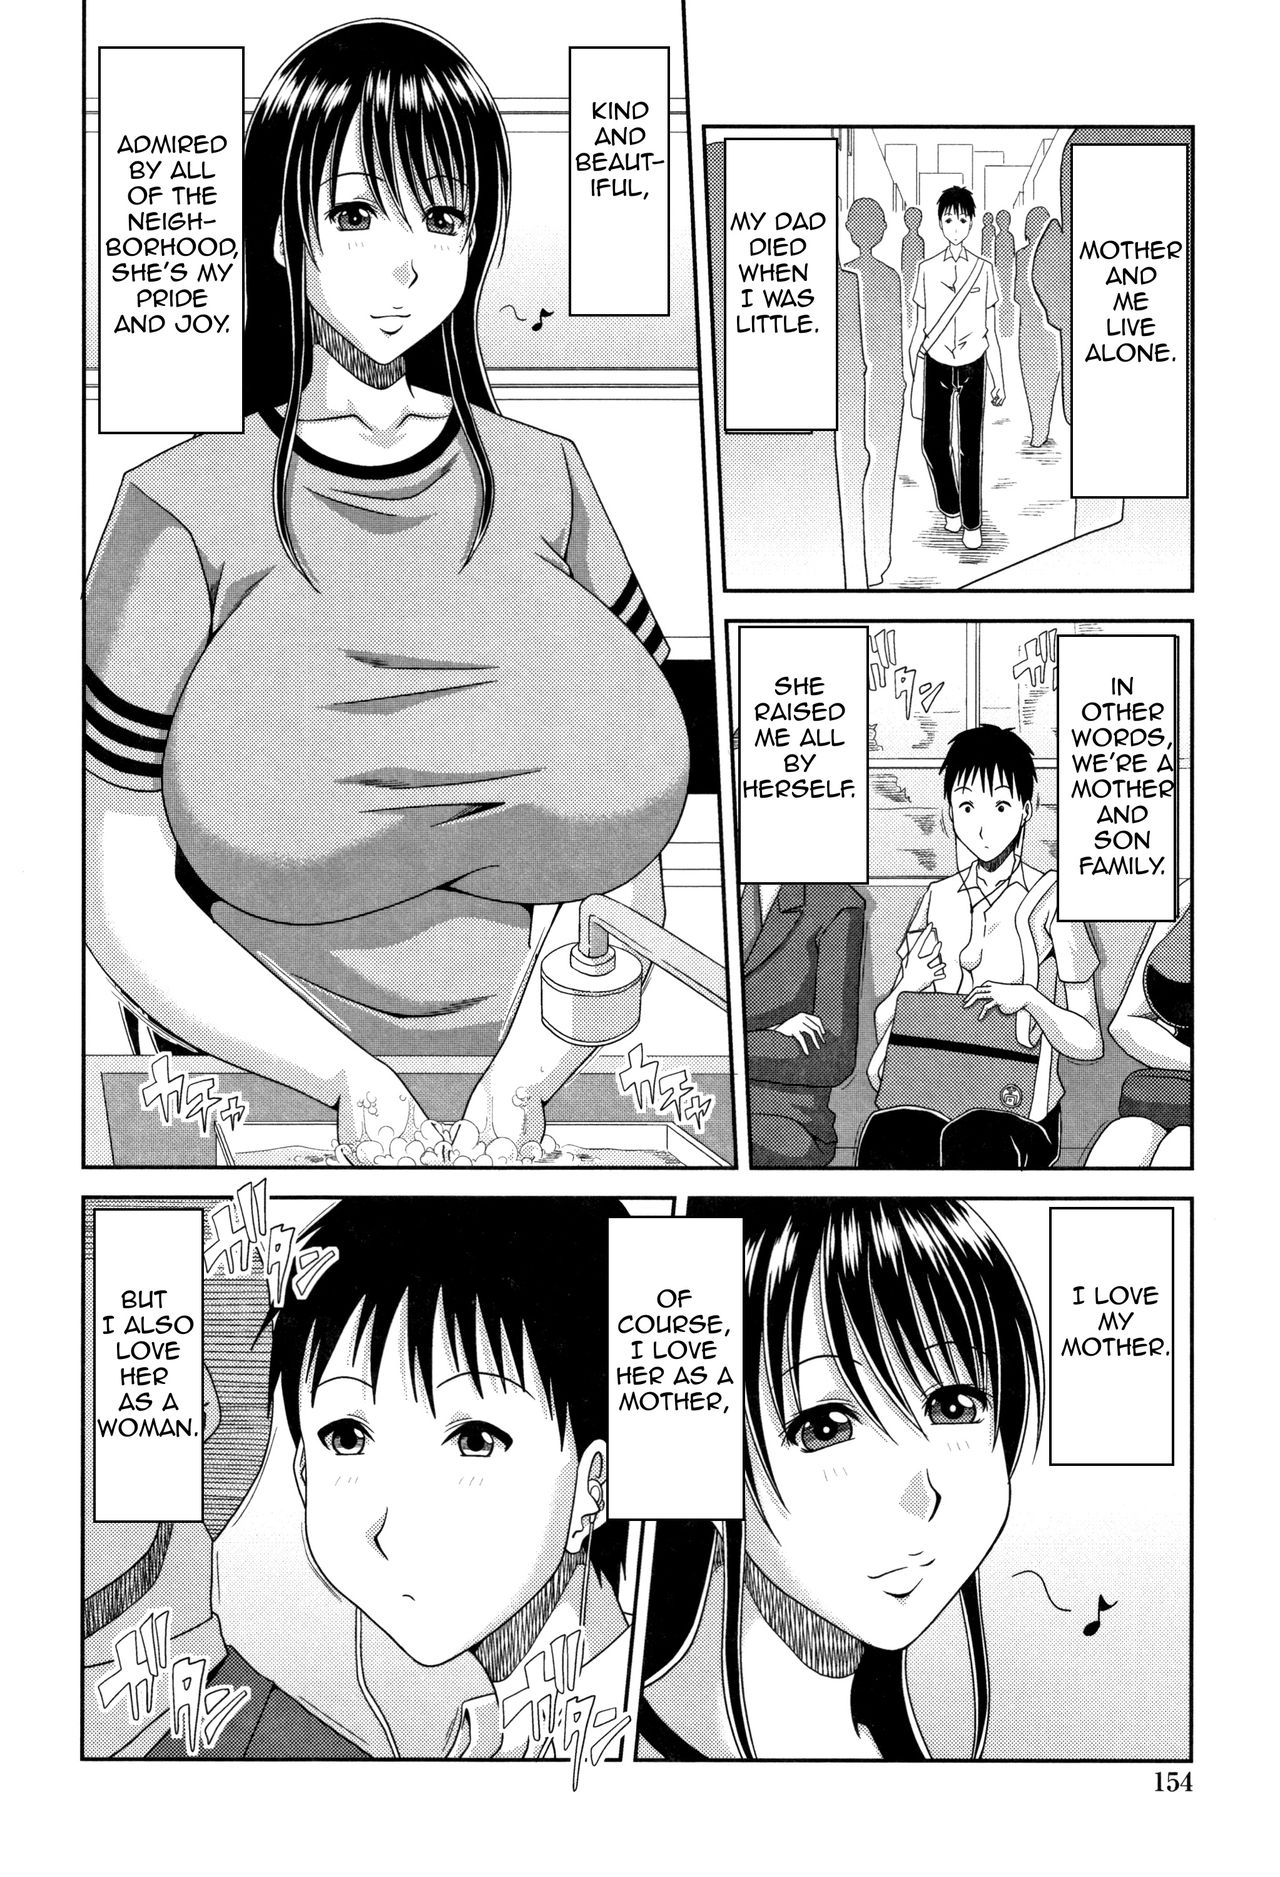 Son Mom Bad Relationship - Mother and Son Forbidden Relations [Kai Hiroyuki] - 1 . Mother and Son  Forbidden Relations - Chapter 1 [Kai Hiroyuki] - AllPornComic